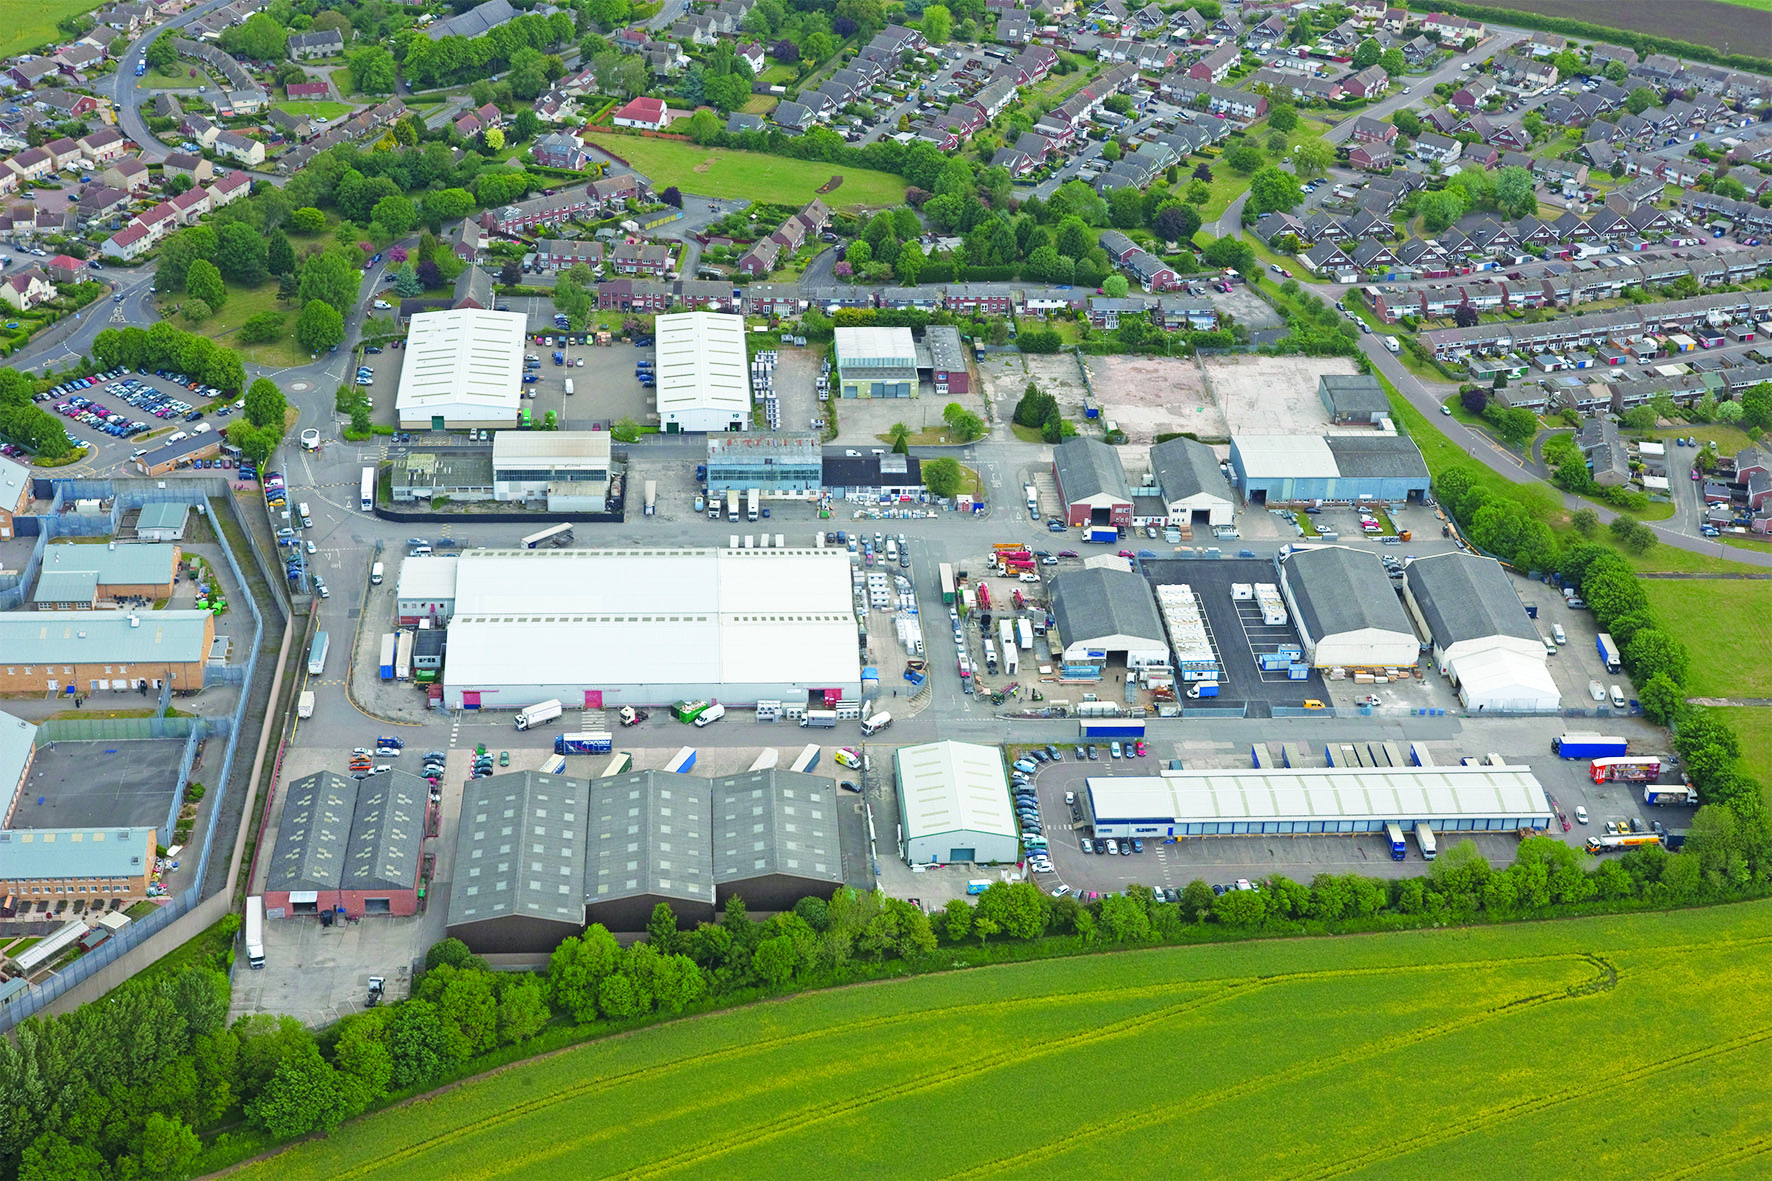 Property: Knight Frank leads £26m deal on four industrial estates